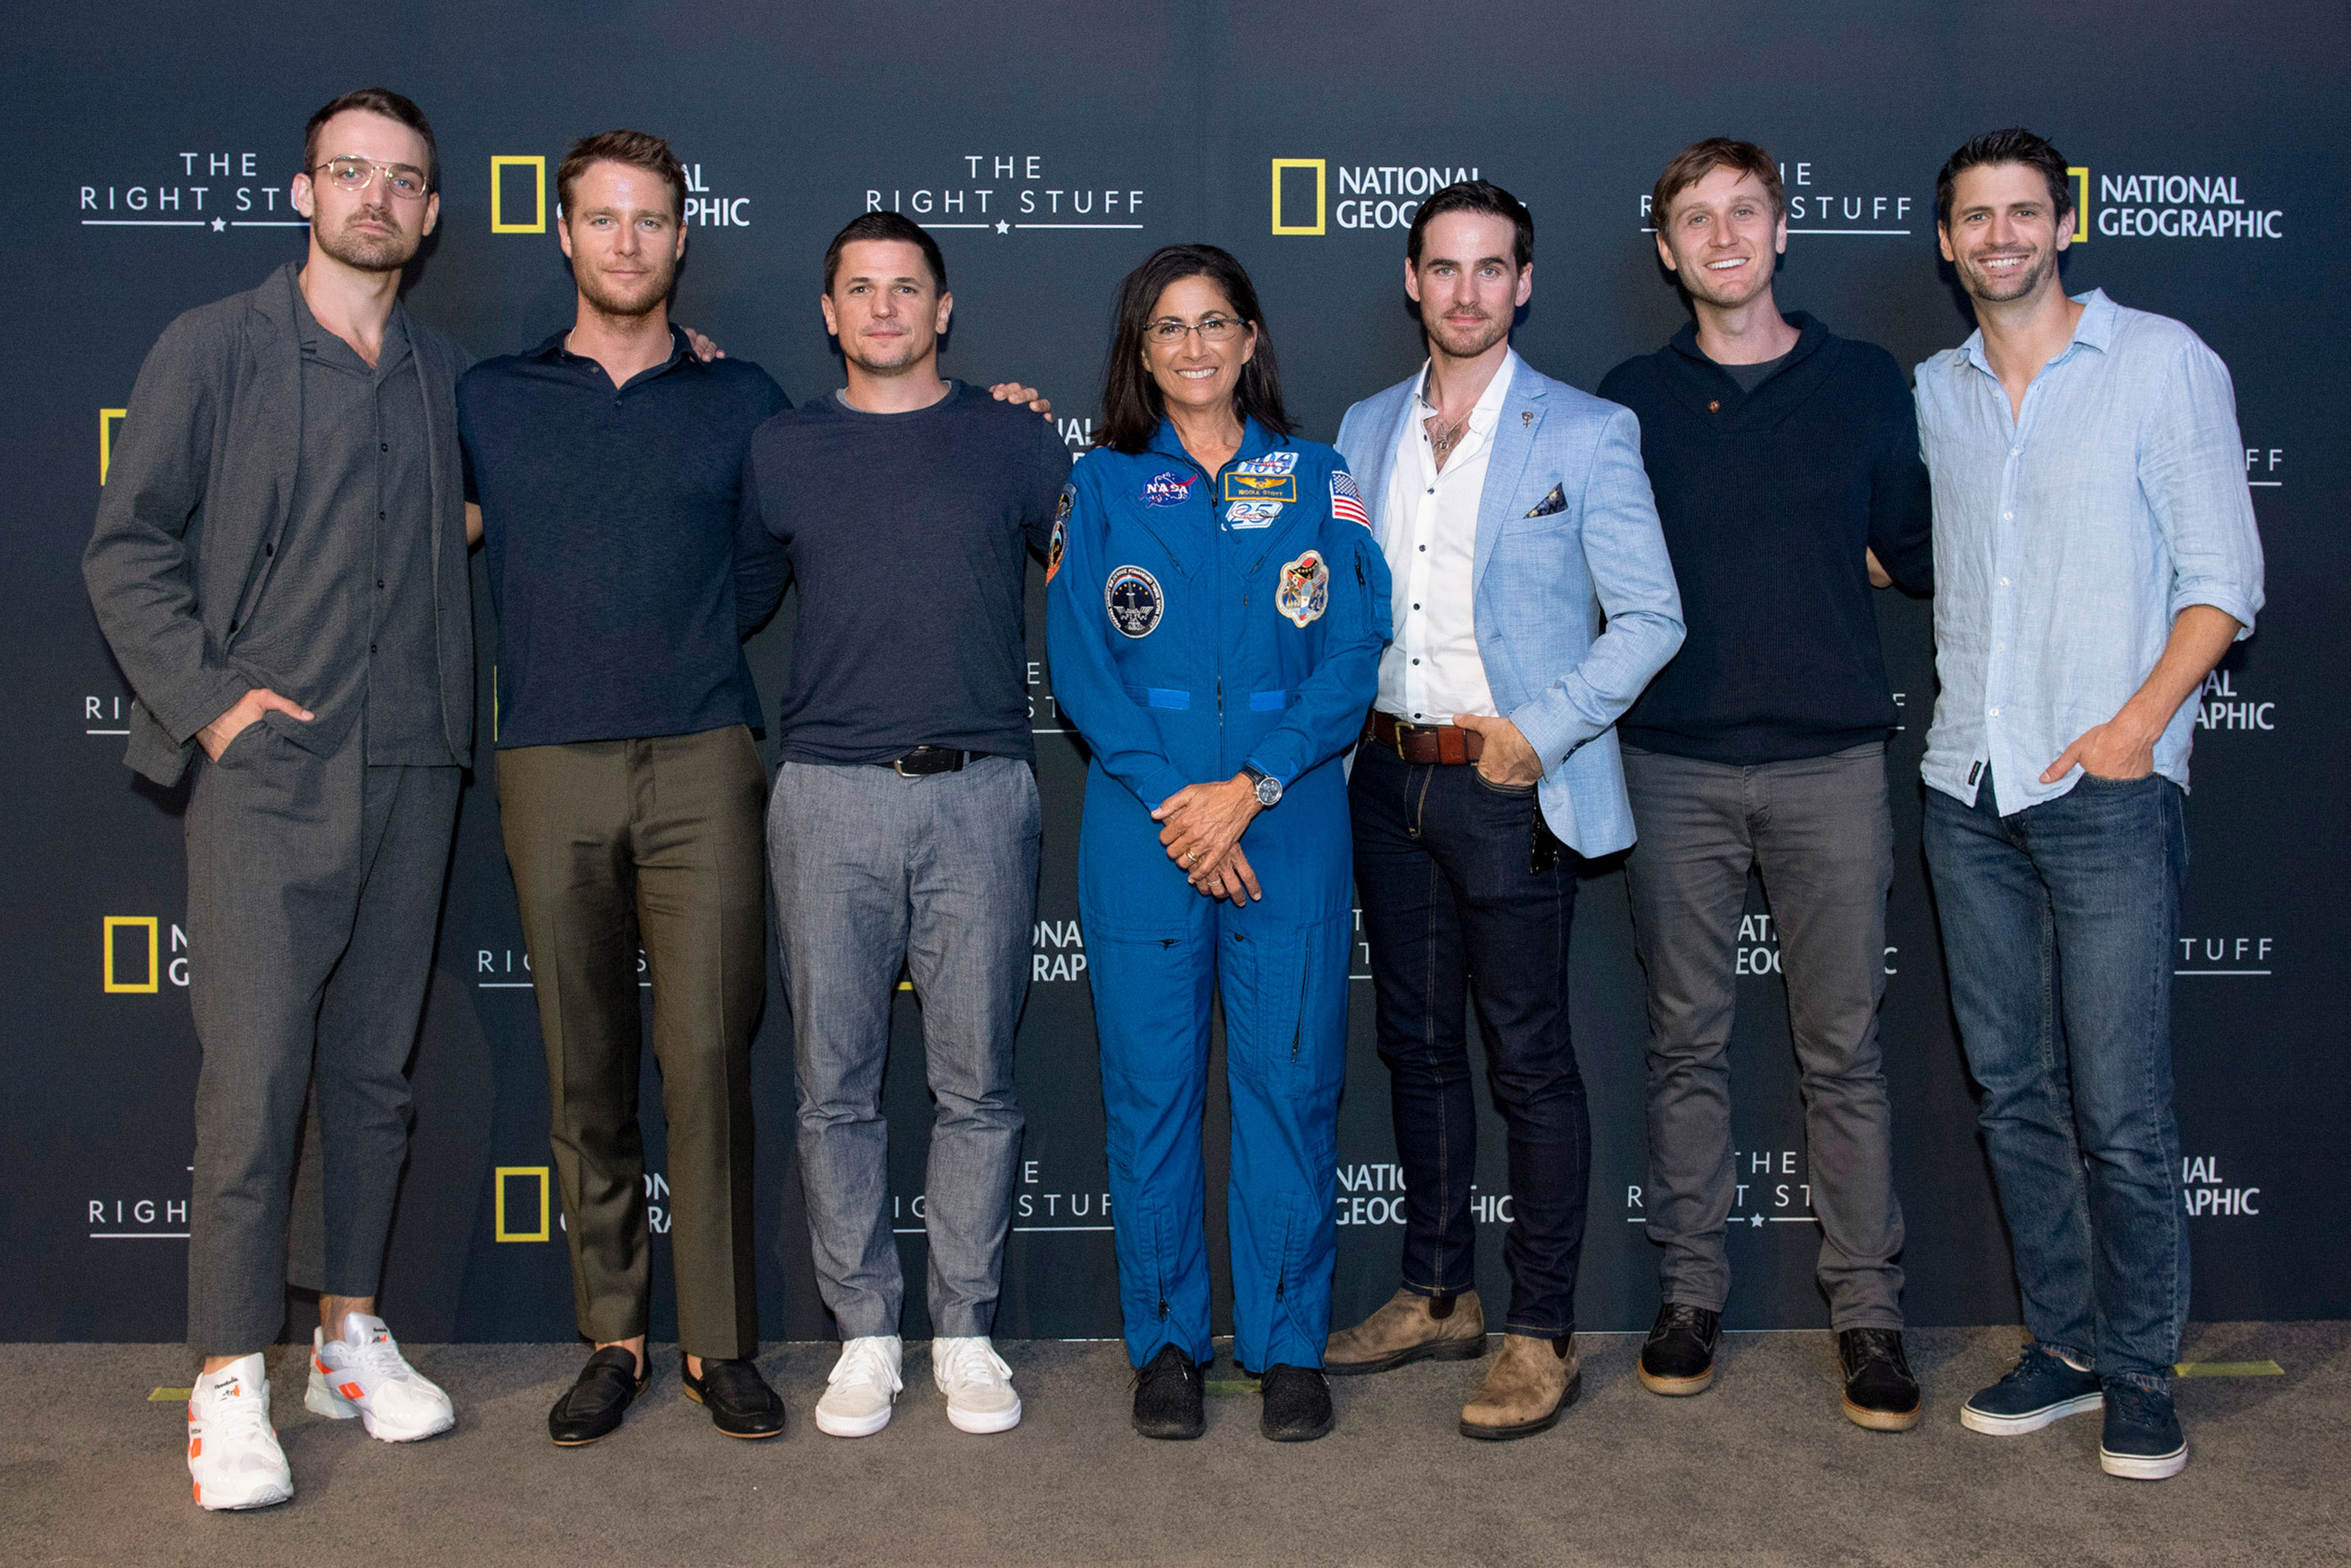 Six Actors Join Cast of National Geographic's The Right Stuff